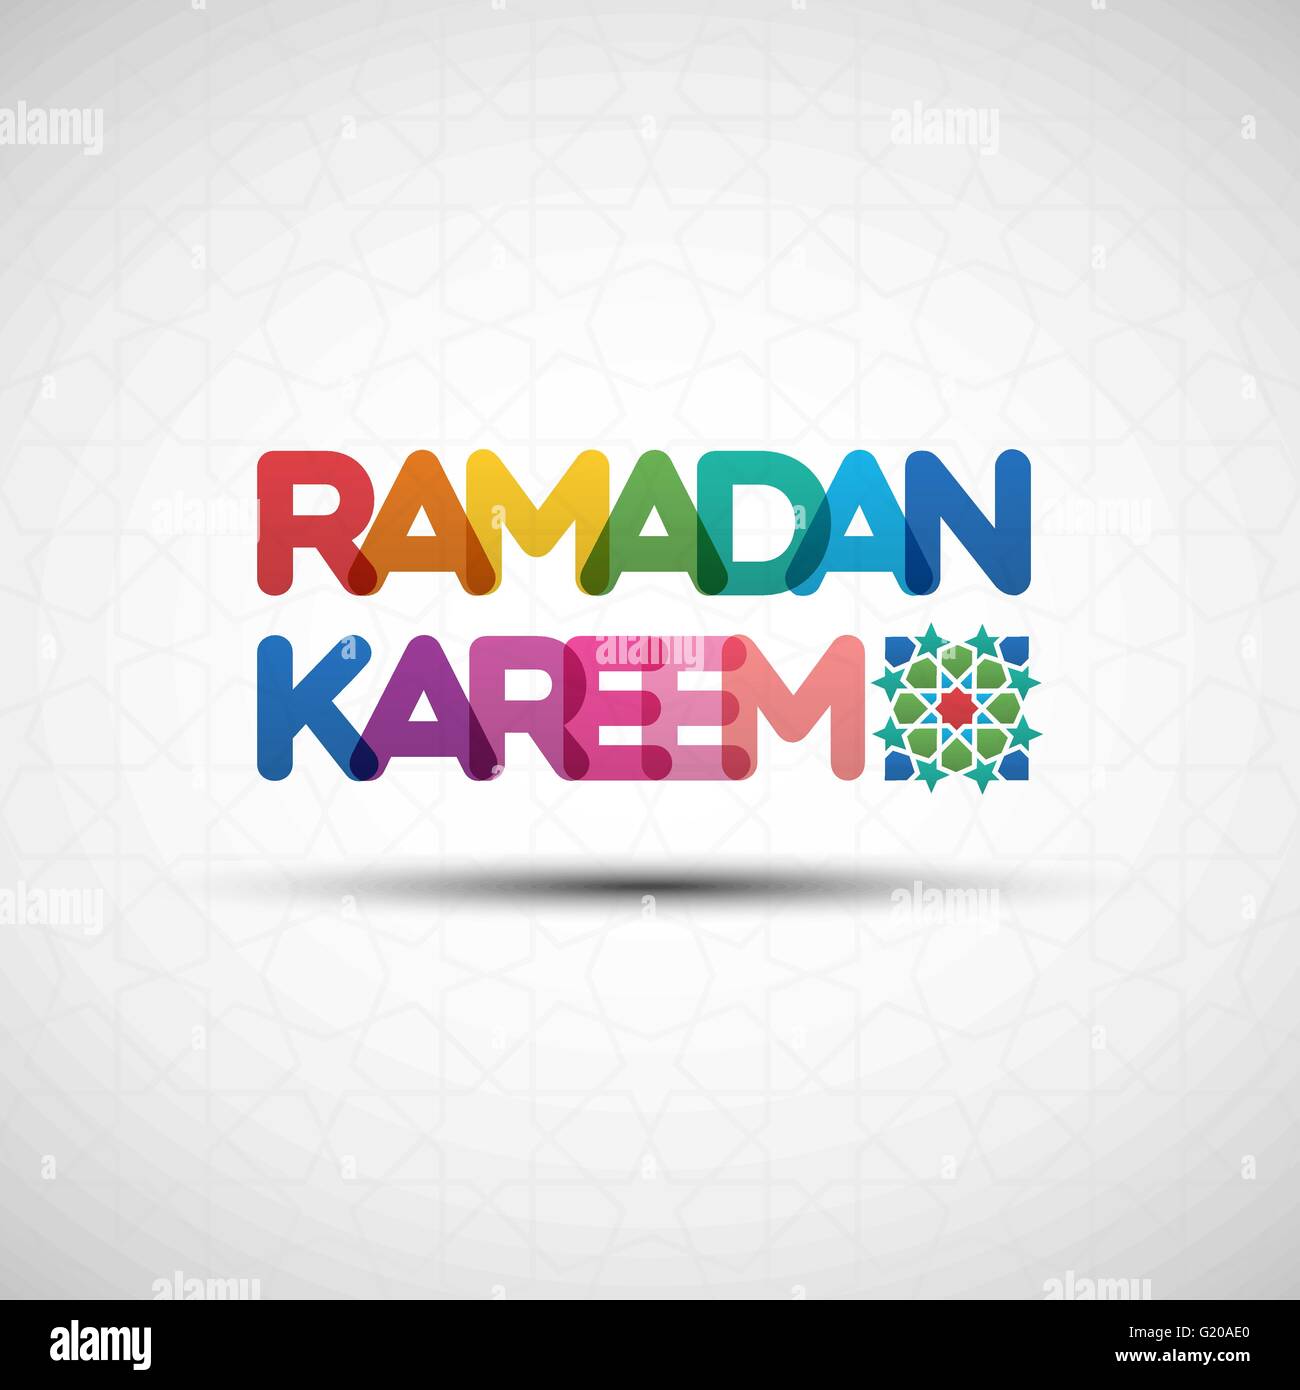 Vector Illustration of Ramadan Kareem on seamless pattern. Greeting card design with creative multicolored transparent text for Stock Vector